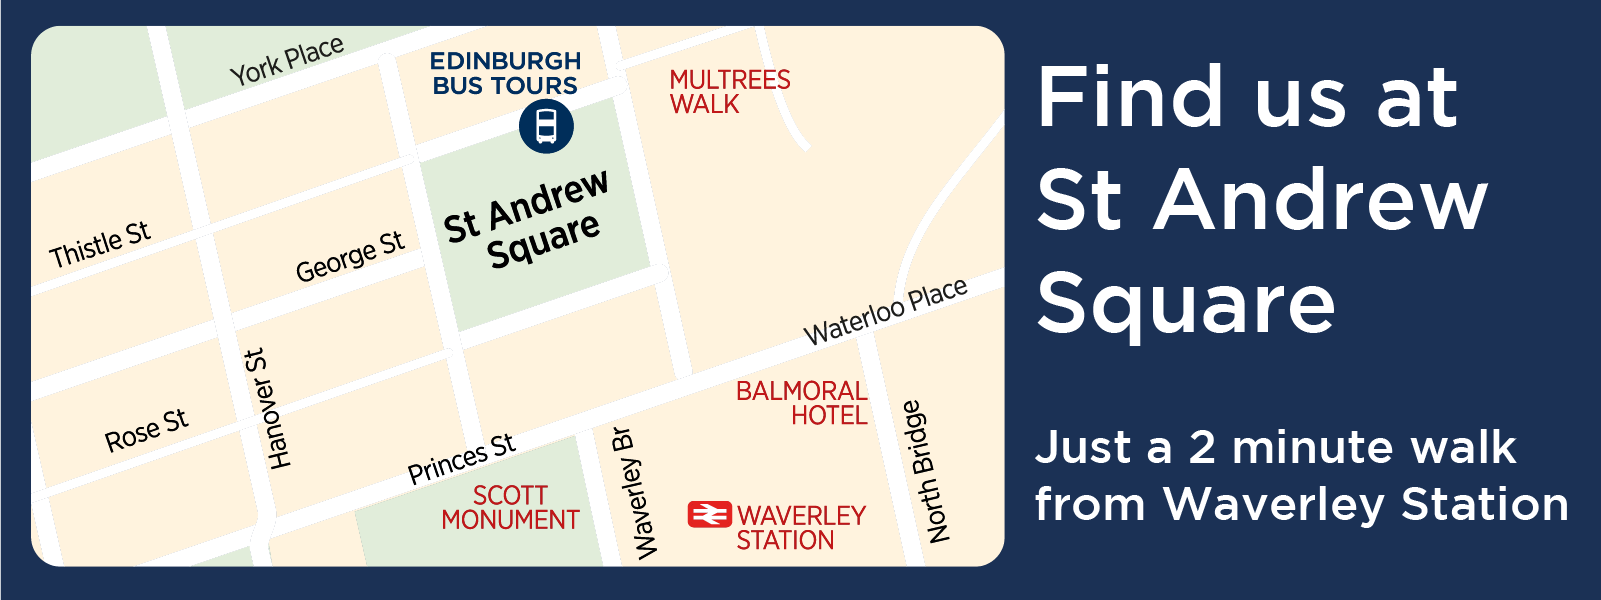 Click to find the bus tours location at St Andrew Square